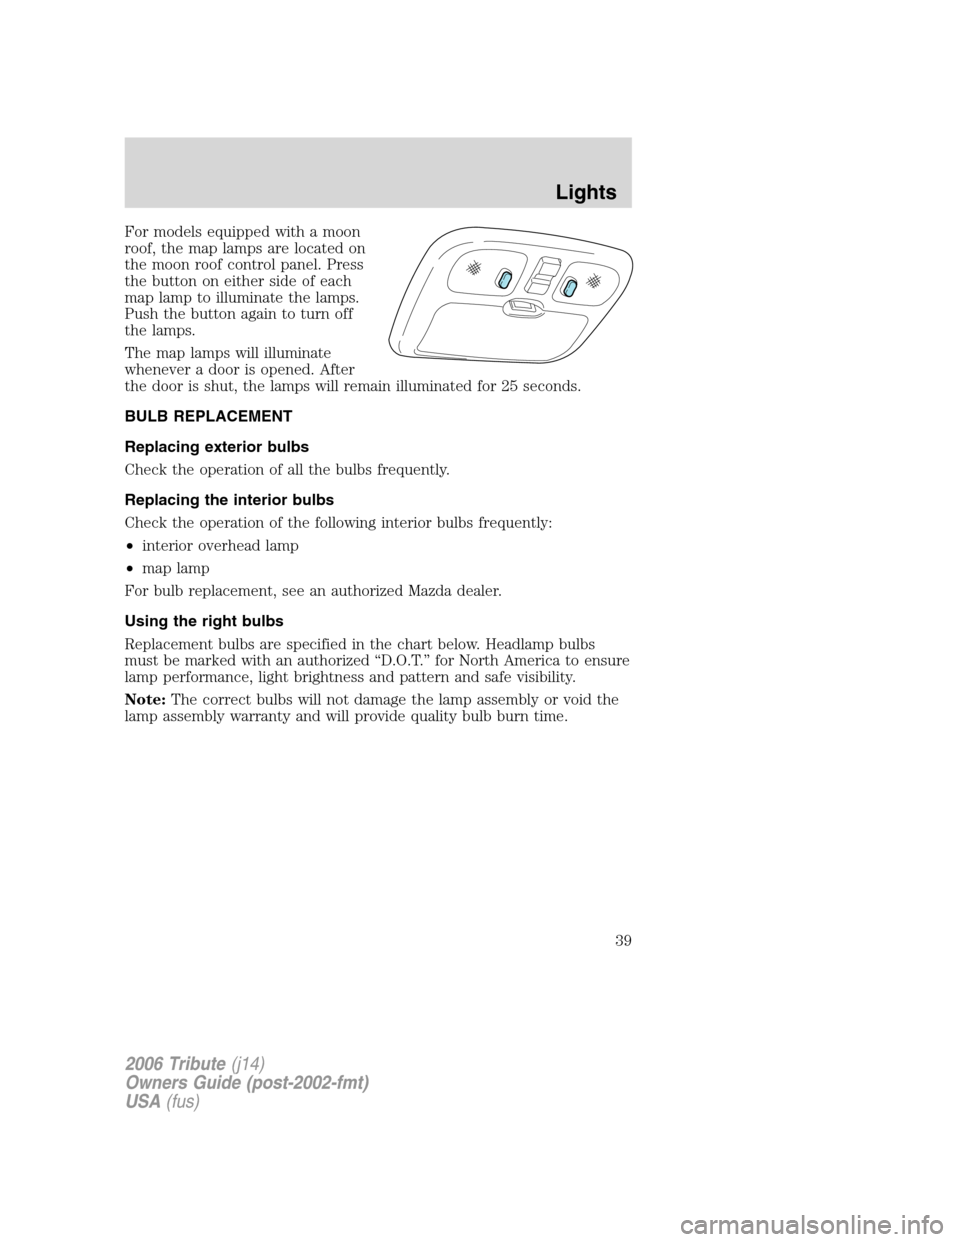 MAZDA MODEL TRIBUTE 2006  Owners Manual (in English) For models equipped with a moon
roof, the map lamps are located on
the moon roof control panel. Press
the button on either side of each
map lamp to illuminate the lamps.
Push the button again to turn 